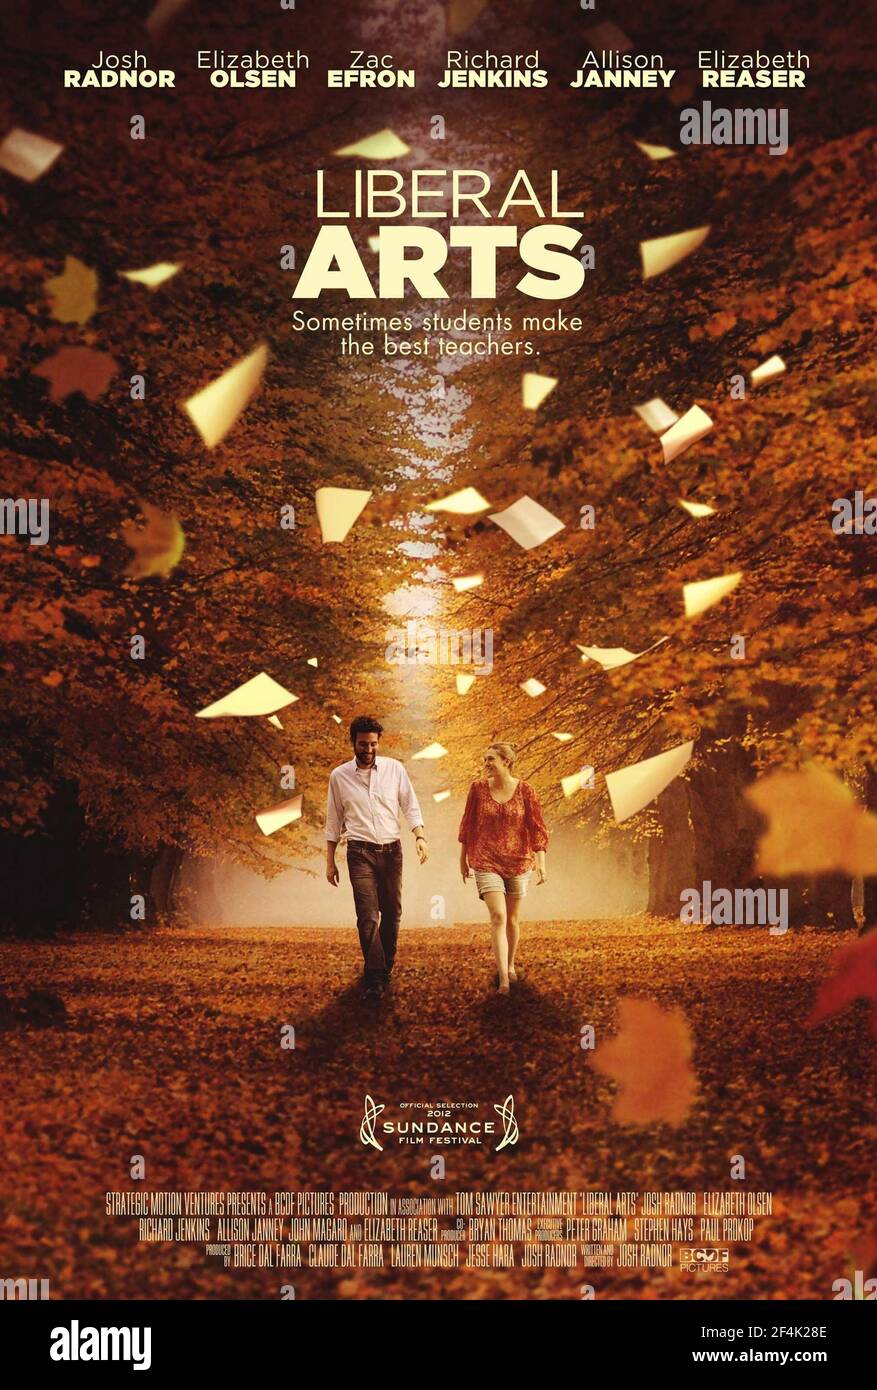 LIBERAL ARTS (2012), directed by JOSH RADNOR. Copyright: Editorial use only. No merchandising or book covers. This is a publicly distributed handout. Access rights only, no license of copyright provided. Only to be reproduced in conjunction with promotion of this film. Credit: BCDF PICTURES / Album Stock Photo